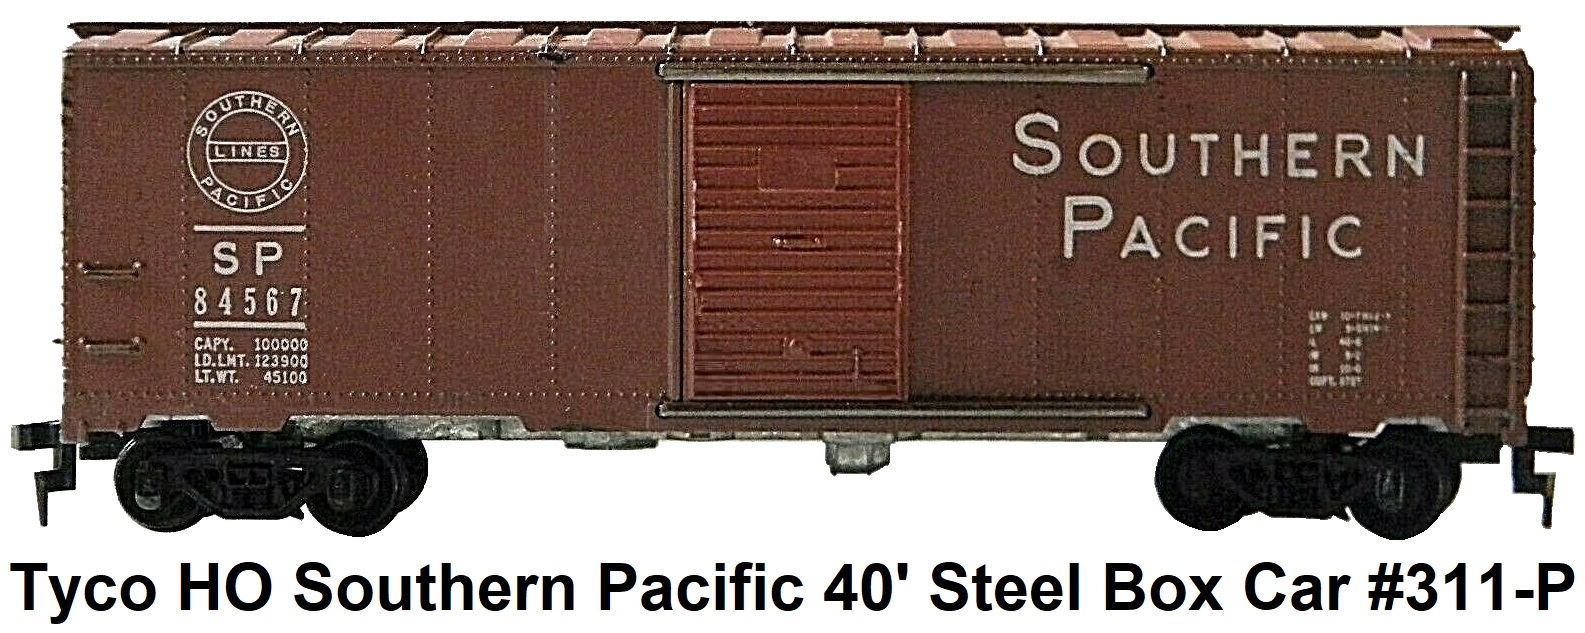 Tyco HO Southern Pacific 40' steel box car #311-P